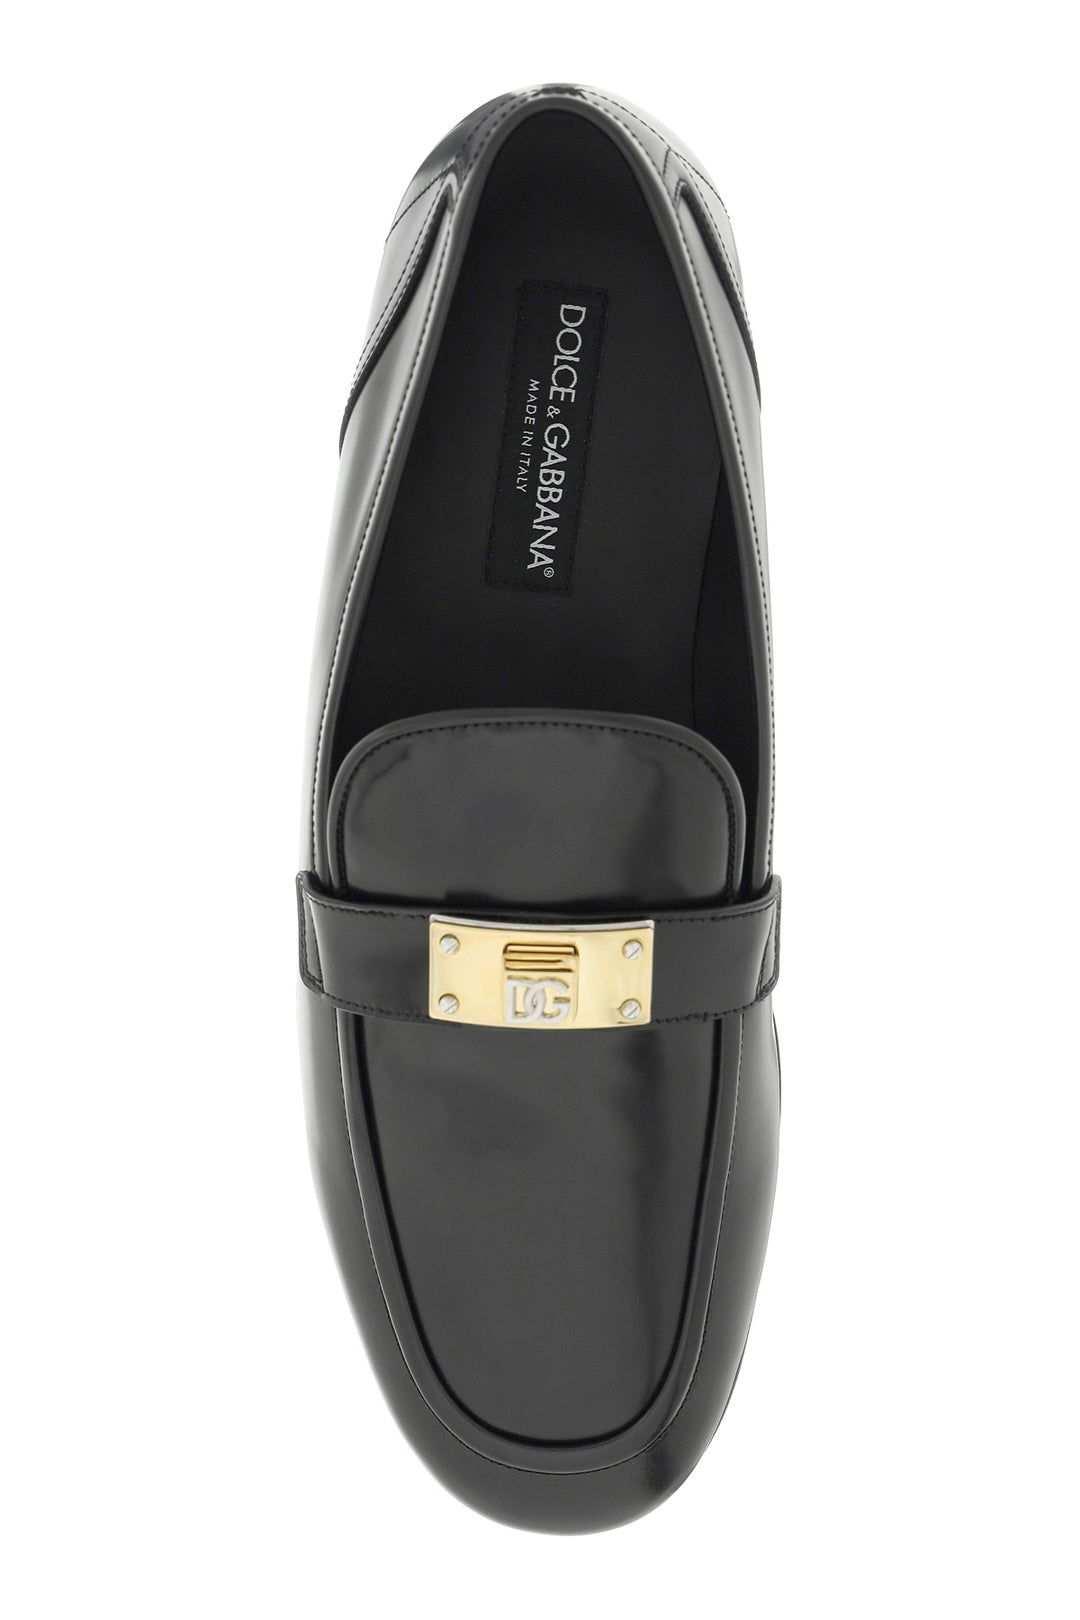 Dolce & Gabbana Leather Loafers   Black